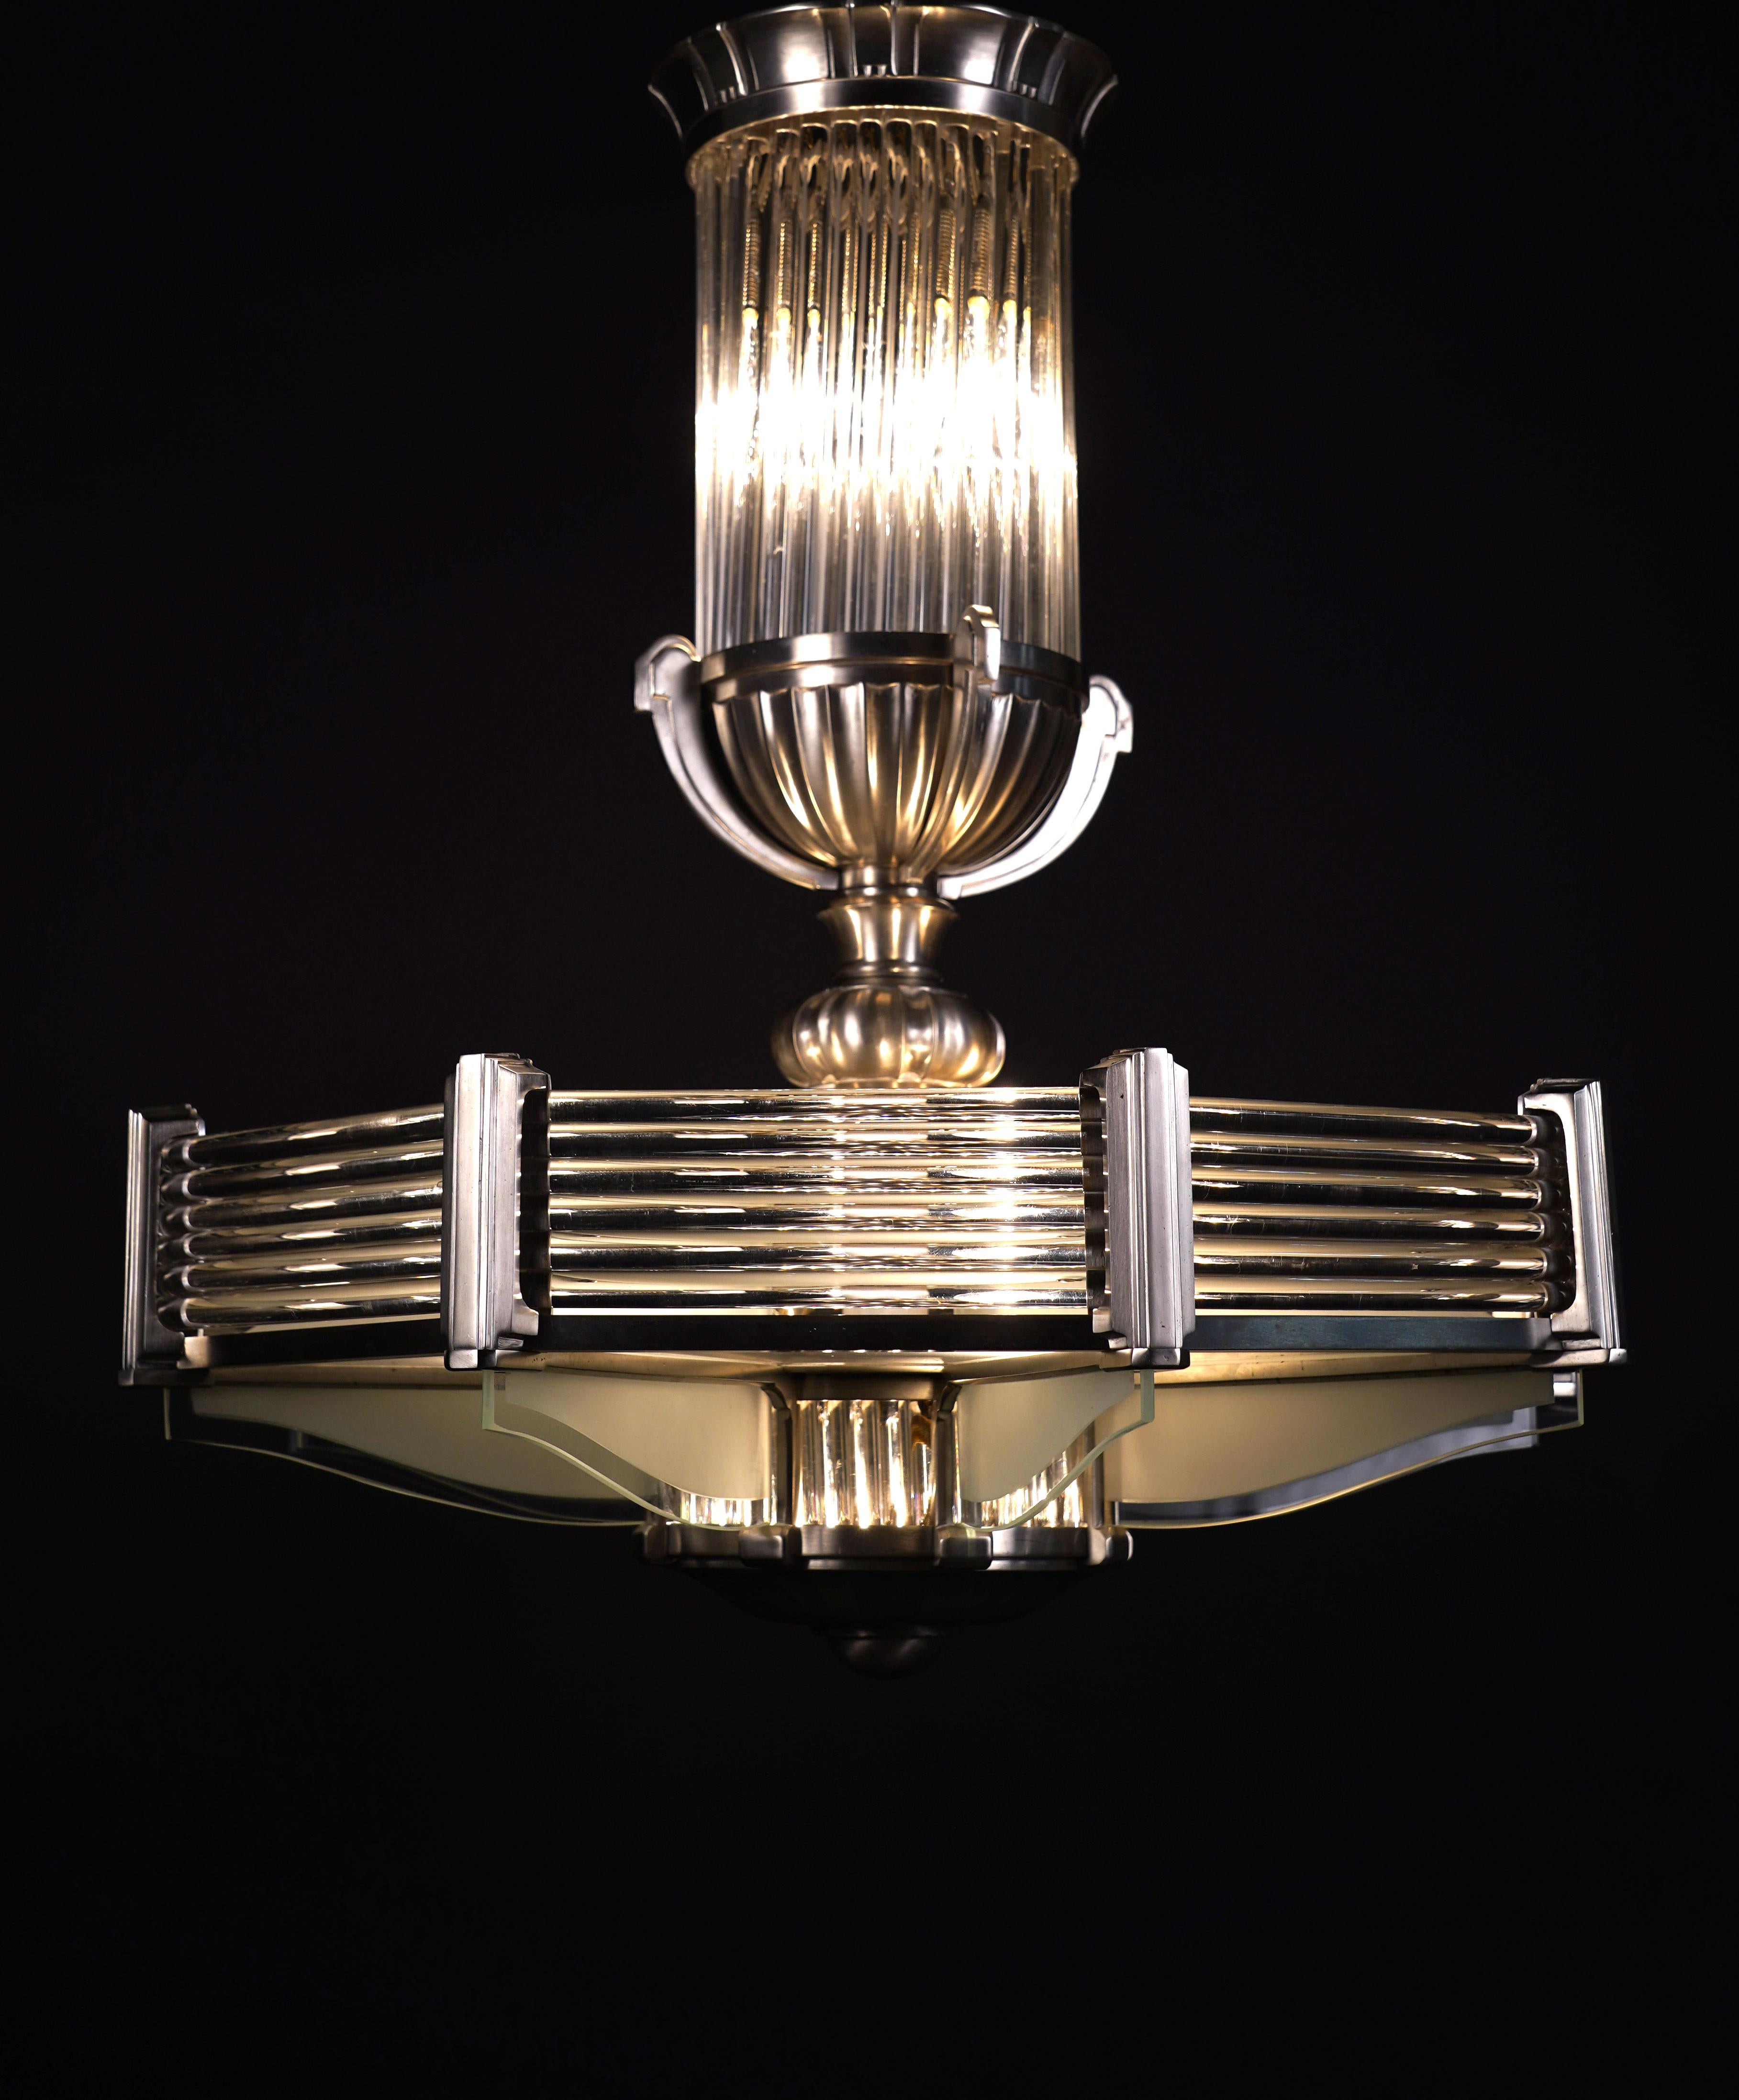 Fine octogonal shaped Art Deco chandelier with eight nickel-plated bronze lights, the whole attractively decorated with glass rods and frosted glass panels.

Biography :
Ateliers Petitot was founded in Paris in 1860 by Eugène Petitot, who began